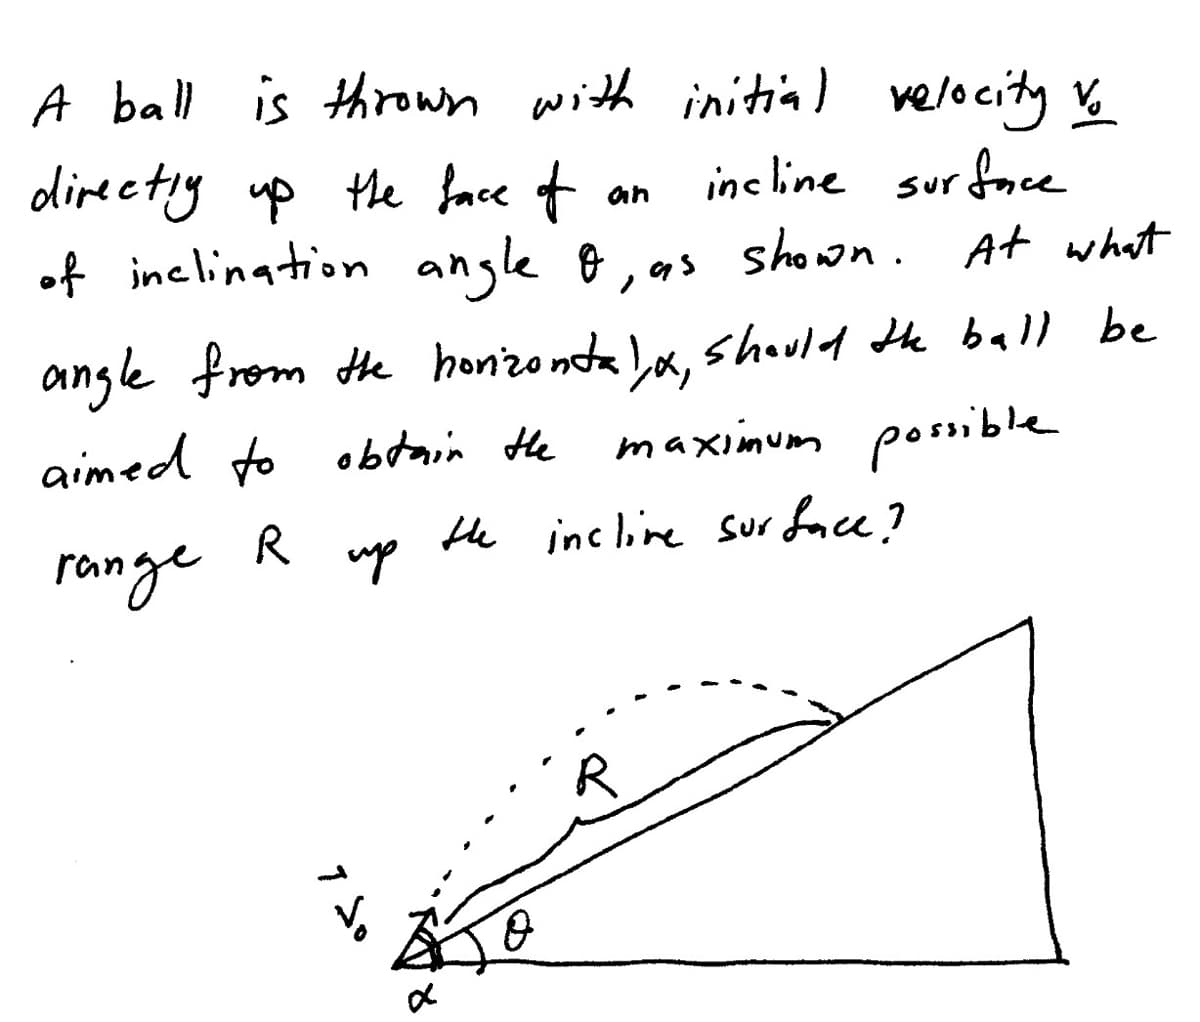 A ball is thrown with initial velocity v
directiy up the face t
of inclination angle &, as shown. At what
inc line sur face
an
angle from the honzo nda )x,
should He ball be
aimed to obtain Hhe
maximum posble
range
R
He inc live sur face?
up
7 So
